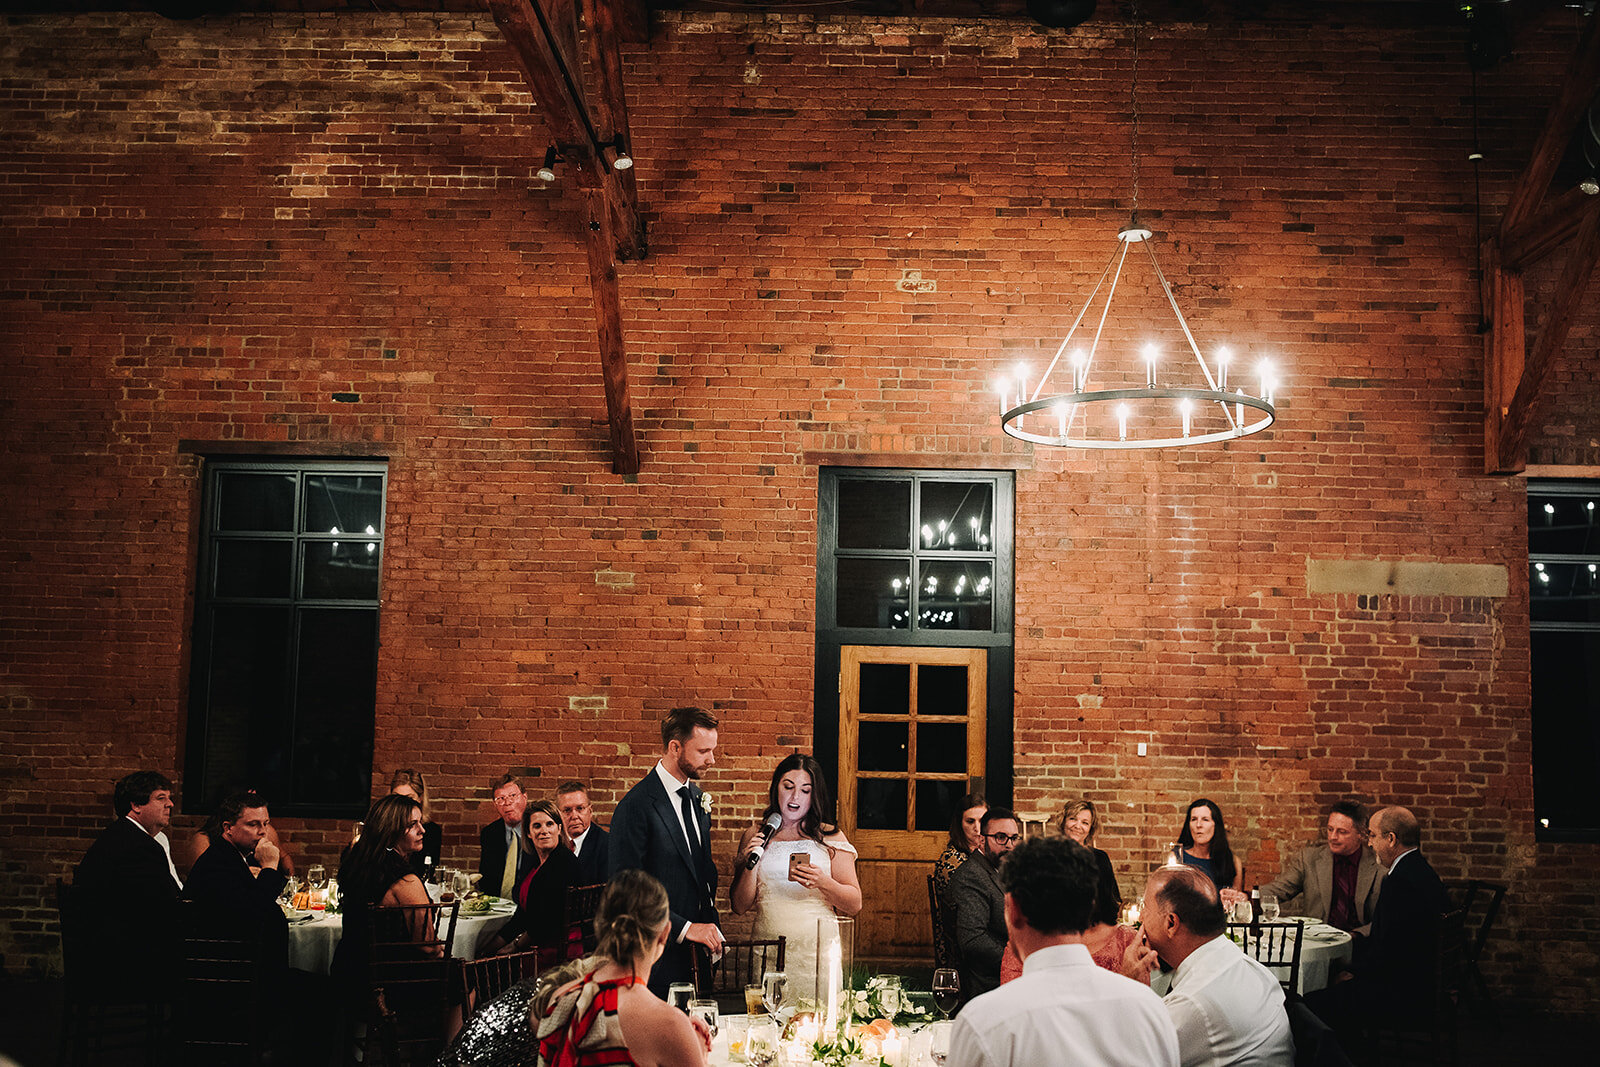 Admiring those industrial details 🖤🖤 

Photography: @derksworks 

Image descriptions:
Image one: A wedding reception at High Line Car House. A bride and groom reads a speech together, standing, against a brick wall. In the foreground, guests sit at